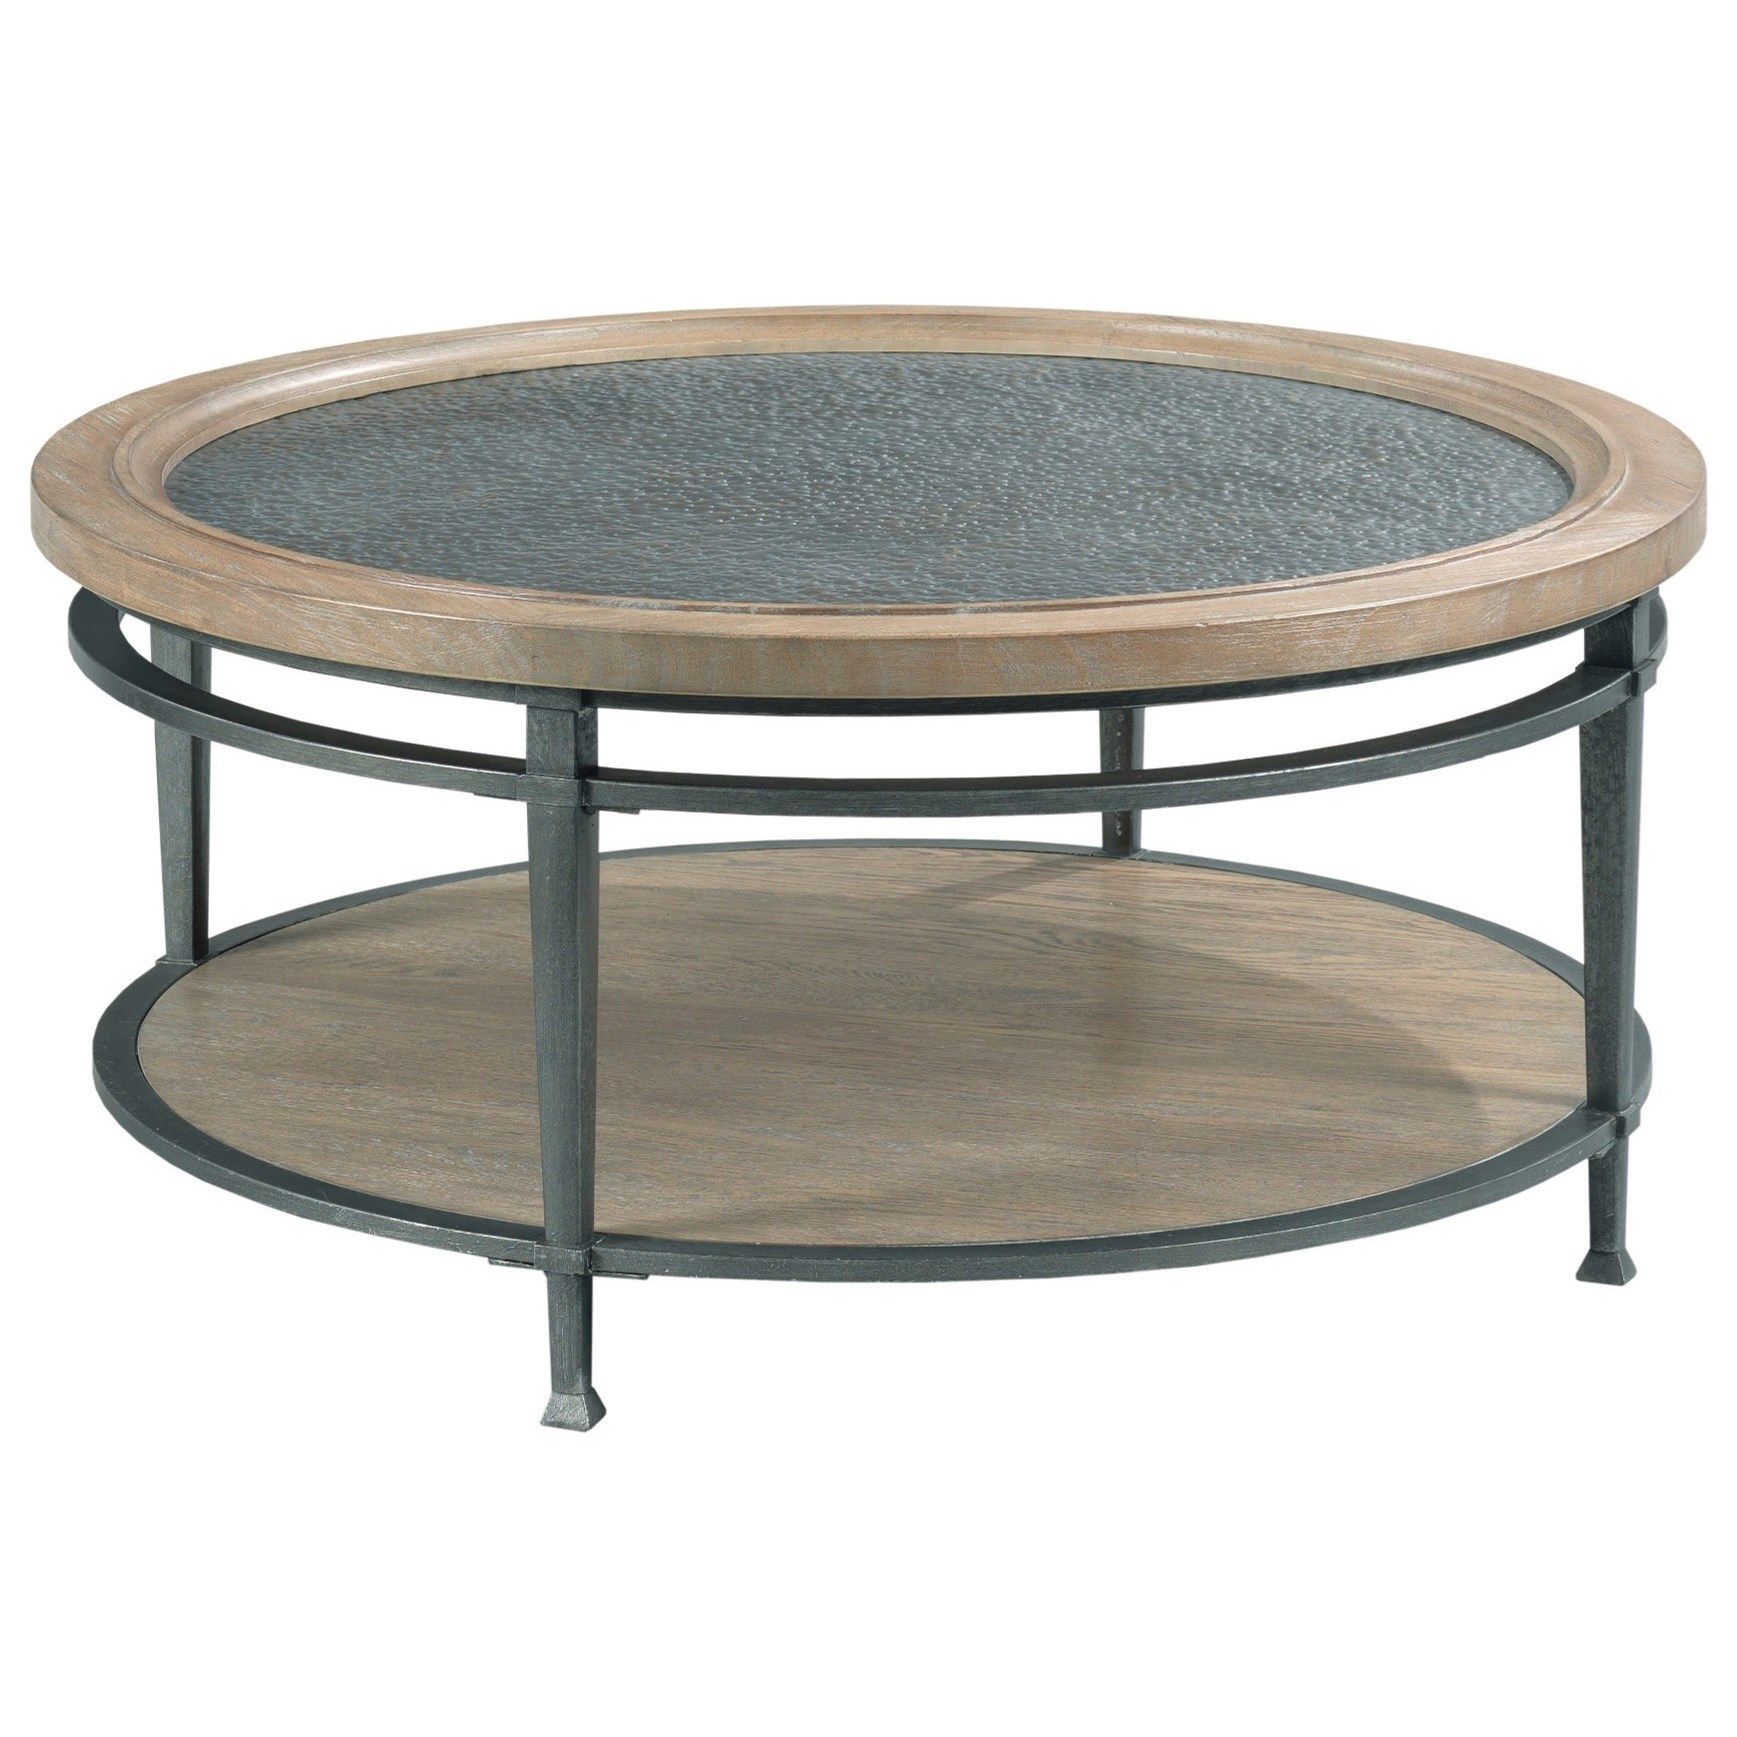 Hammary Austin Transitional Round Coffee Table With Glass Top | Sheely Pertaining To Coffee Tables For 4 6 People (View 5 of 15)